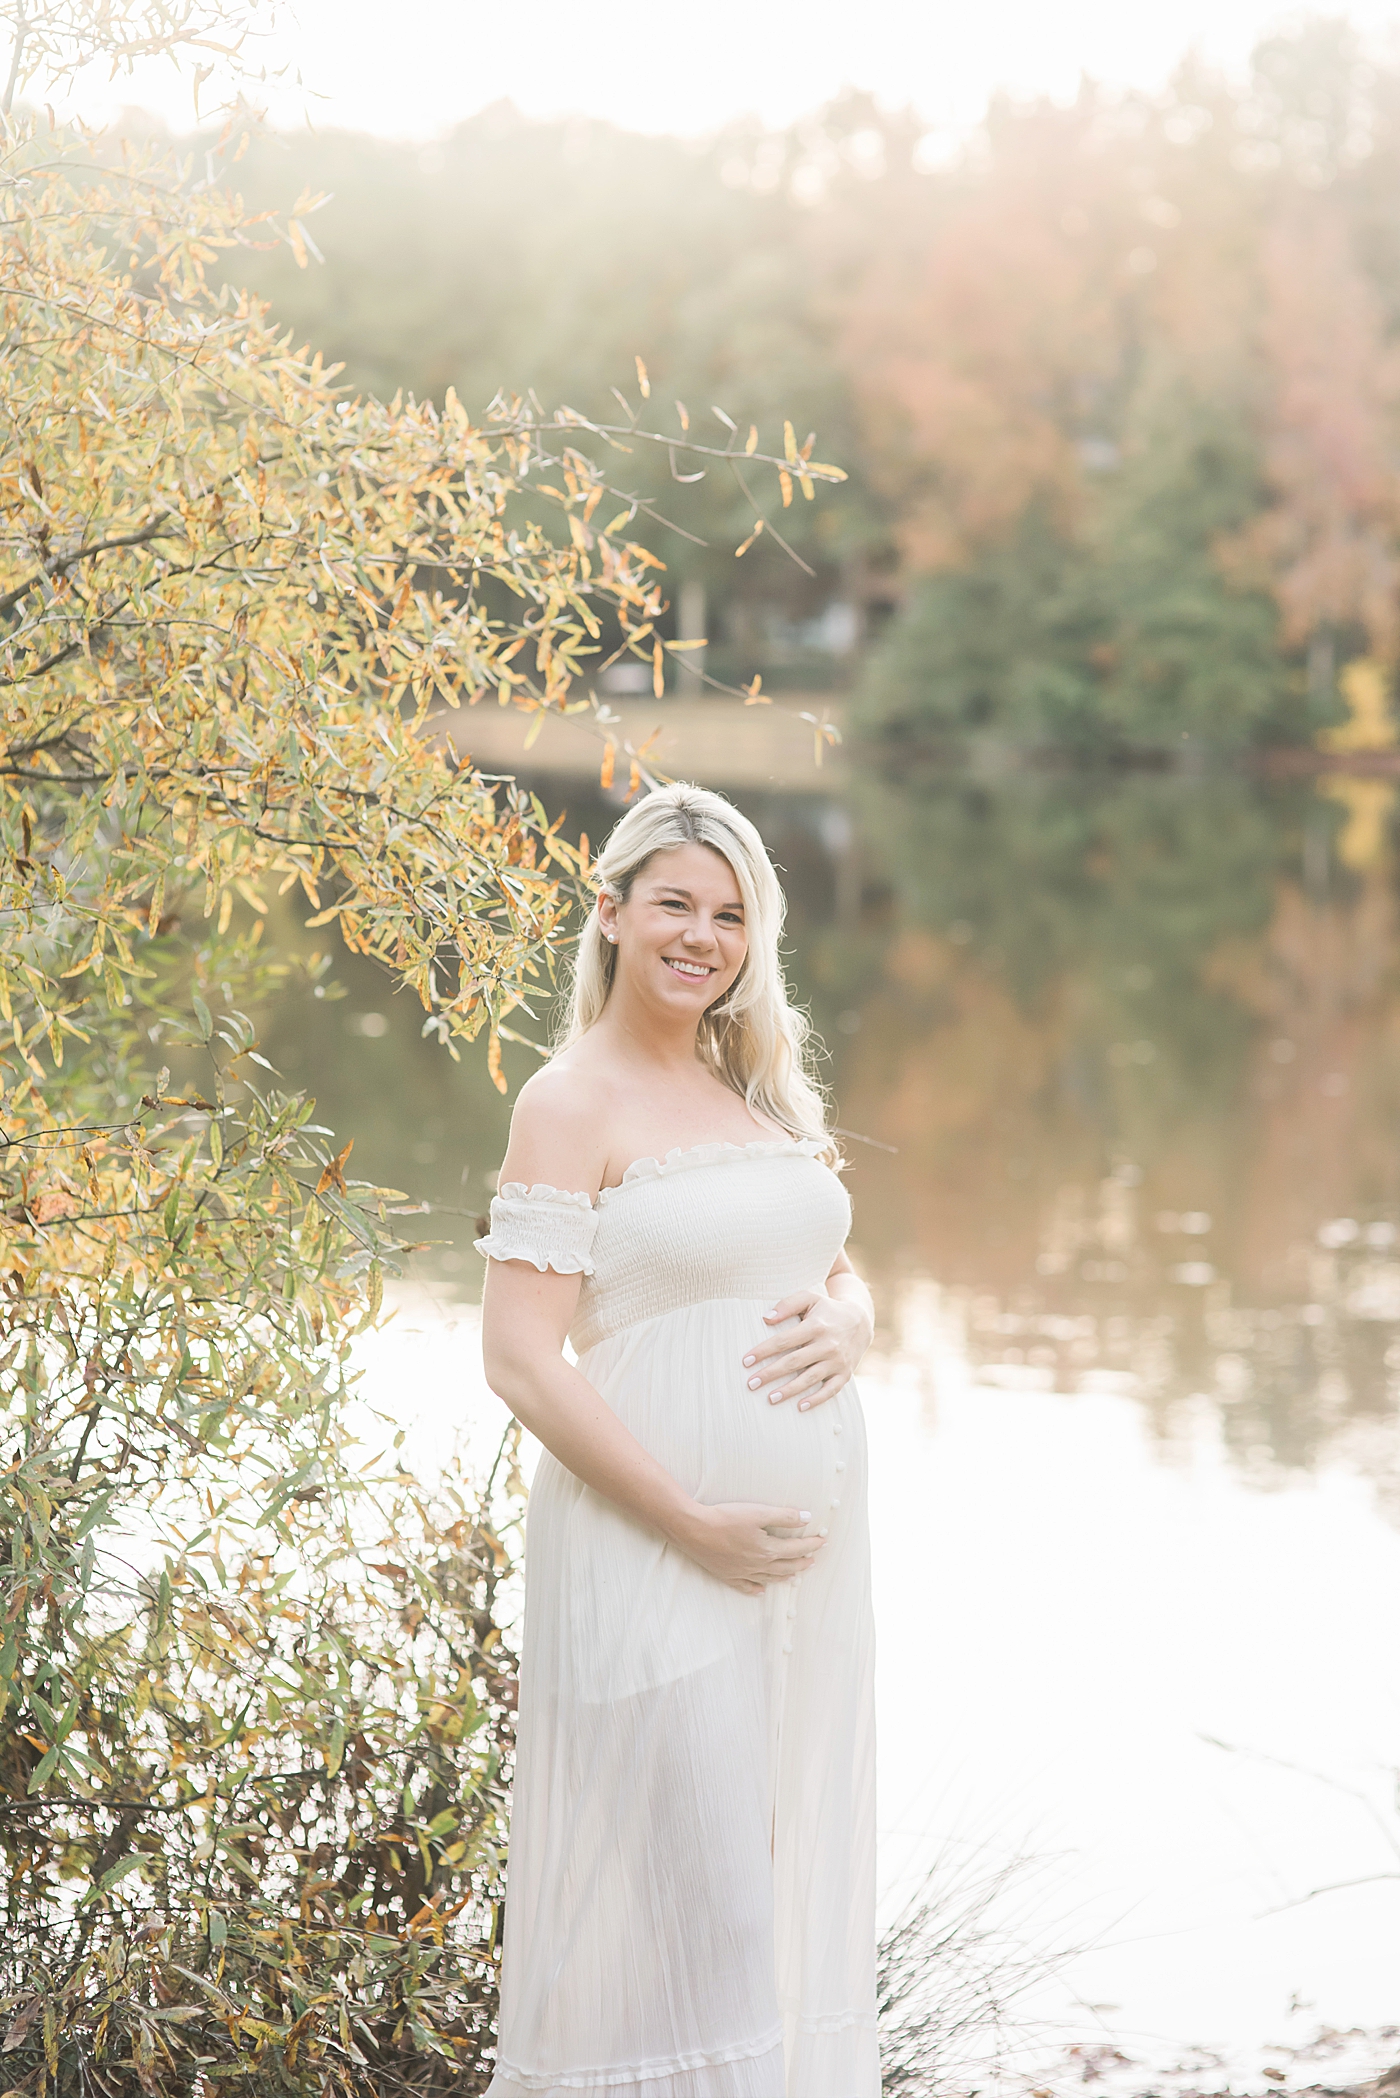 Smiling mother to be in long white dress | Photo by Anna Wisjo 